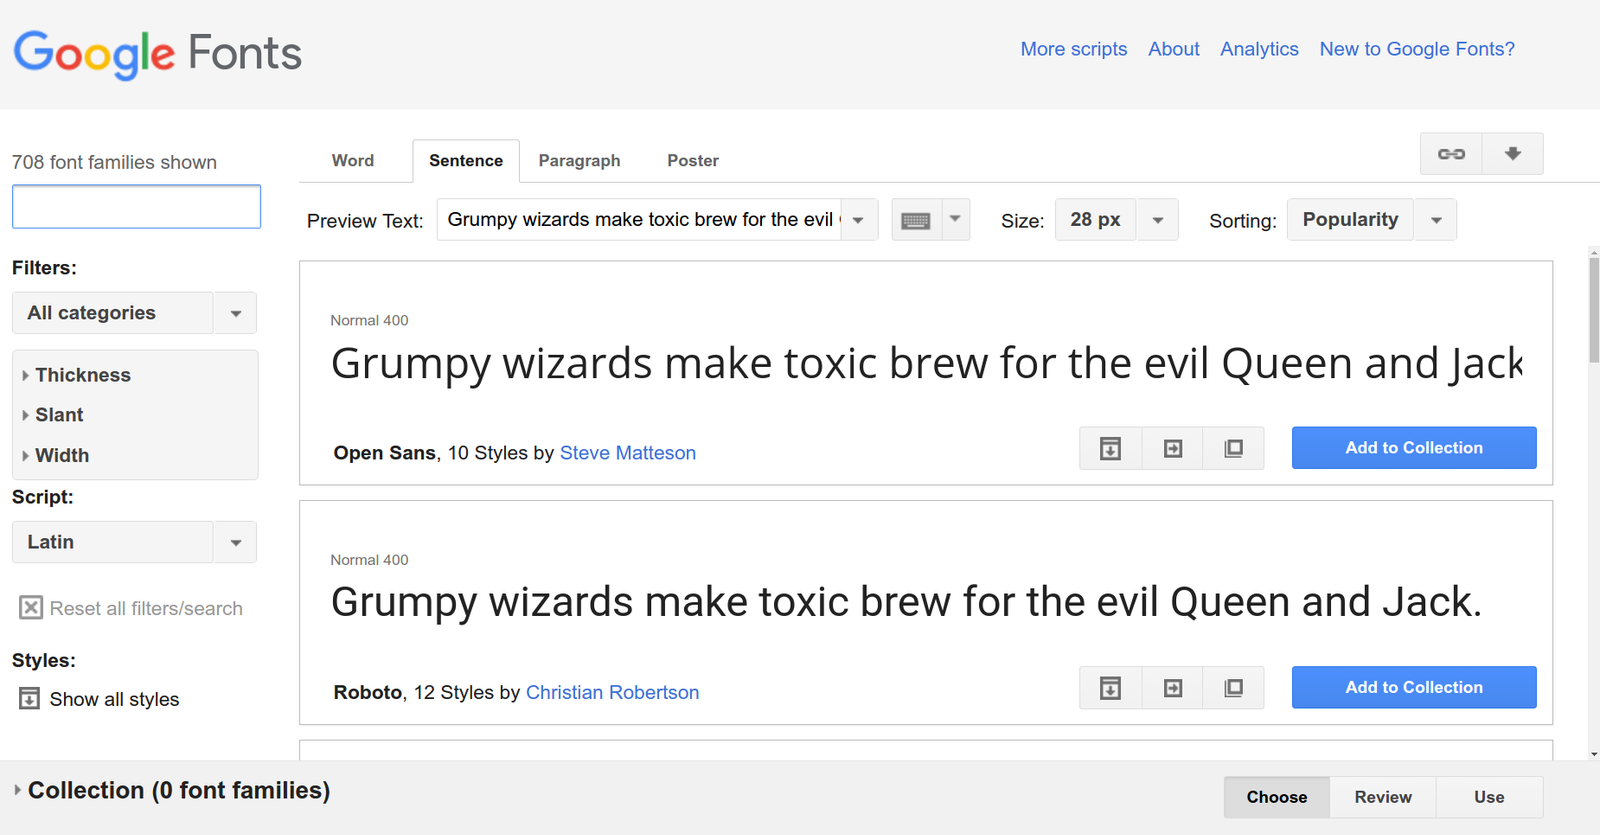 Google Fonts Home Page